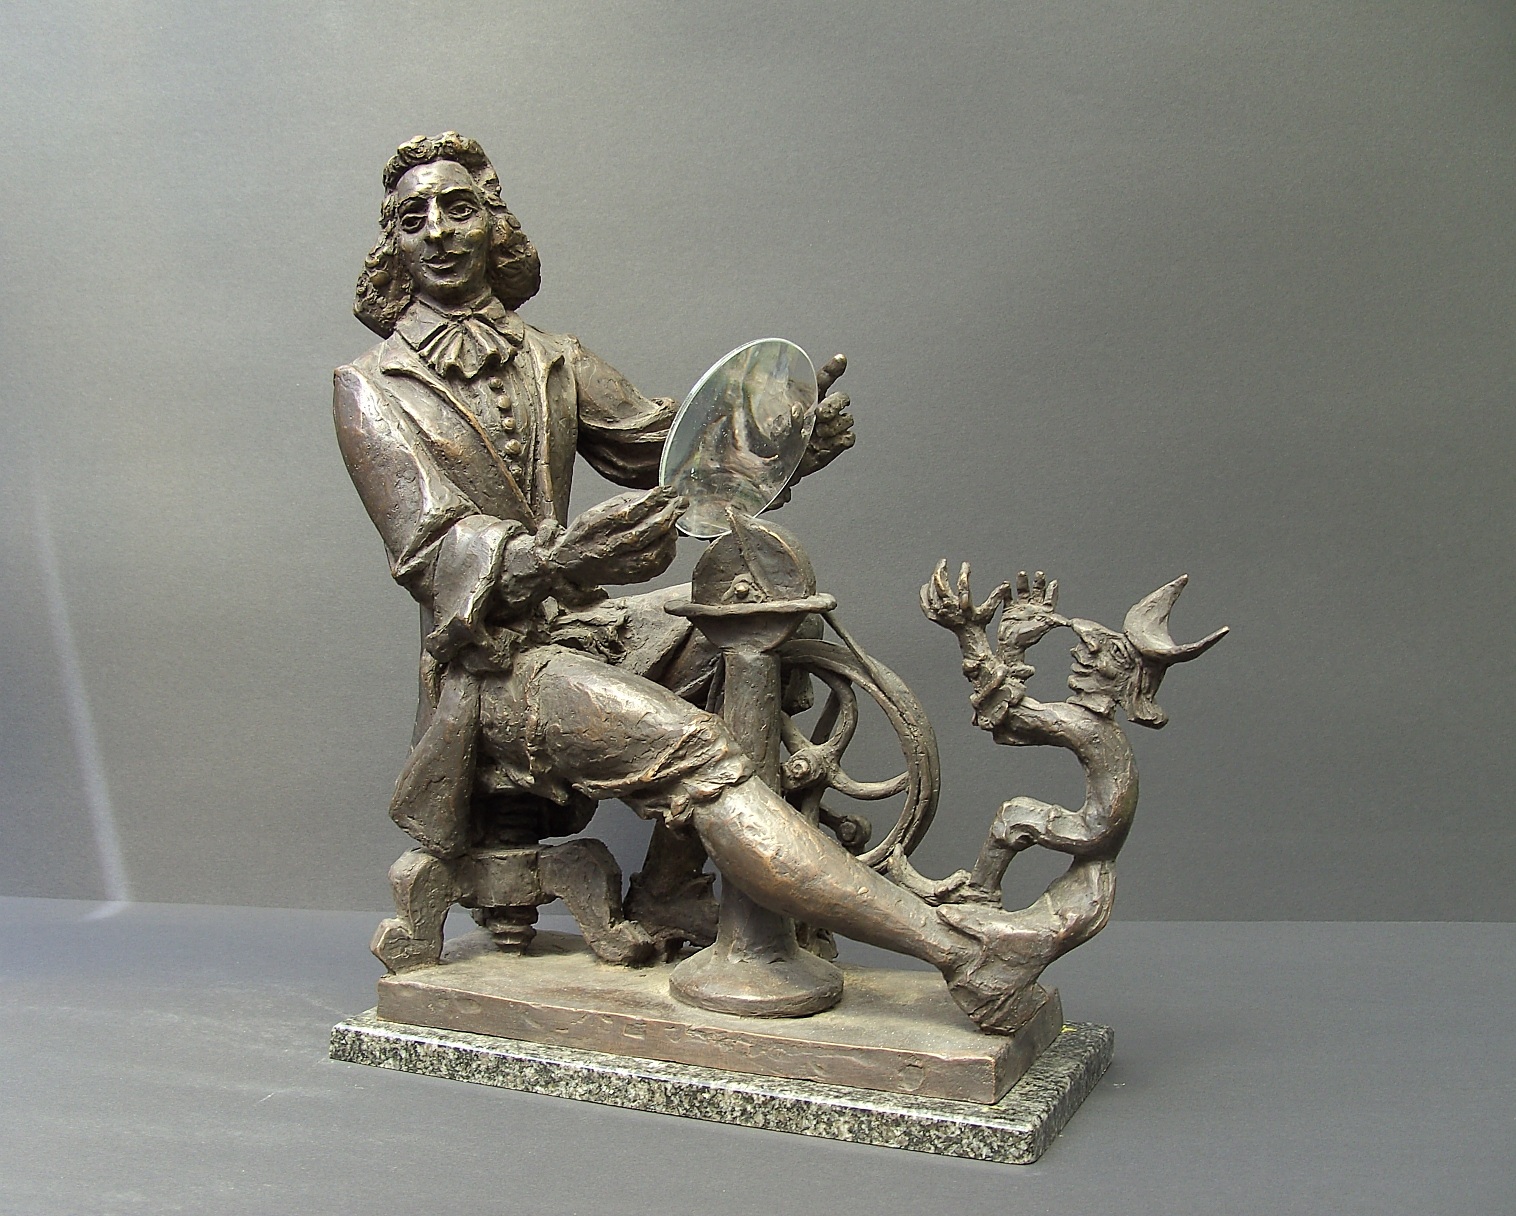 Lens Polisher, Baruch and
        Benedict Spinoza,
        36 x 35 x 14,
        bronze, glass, 2002